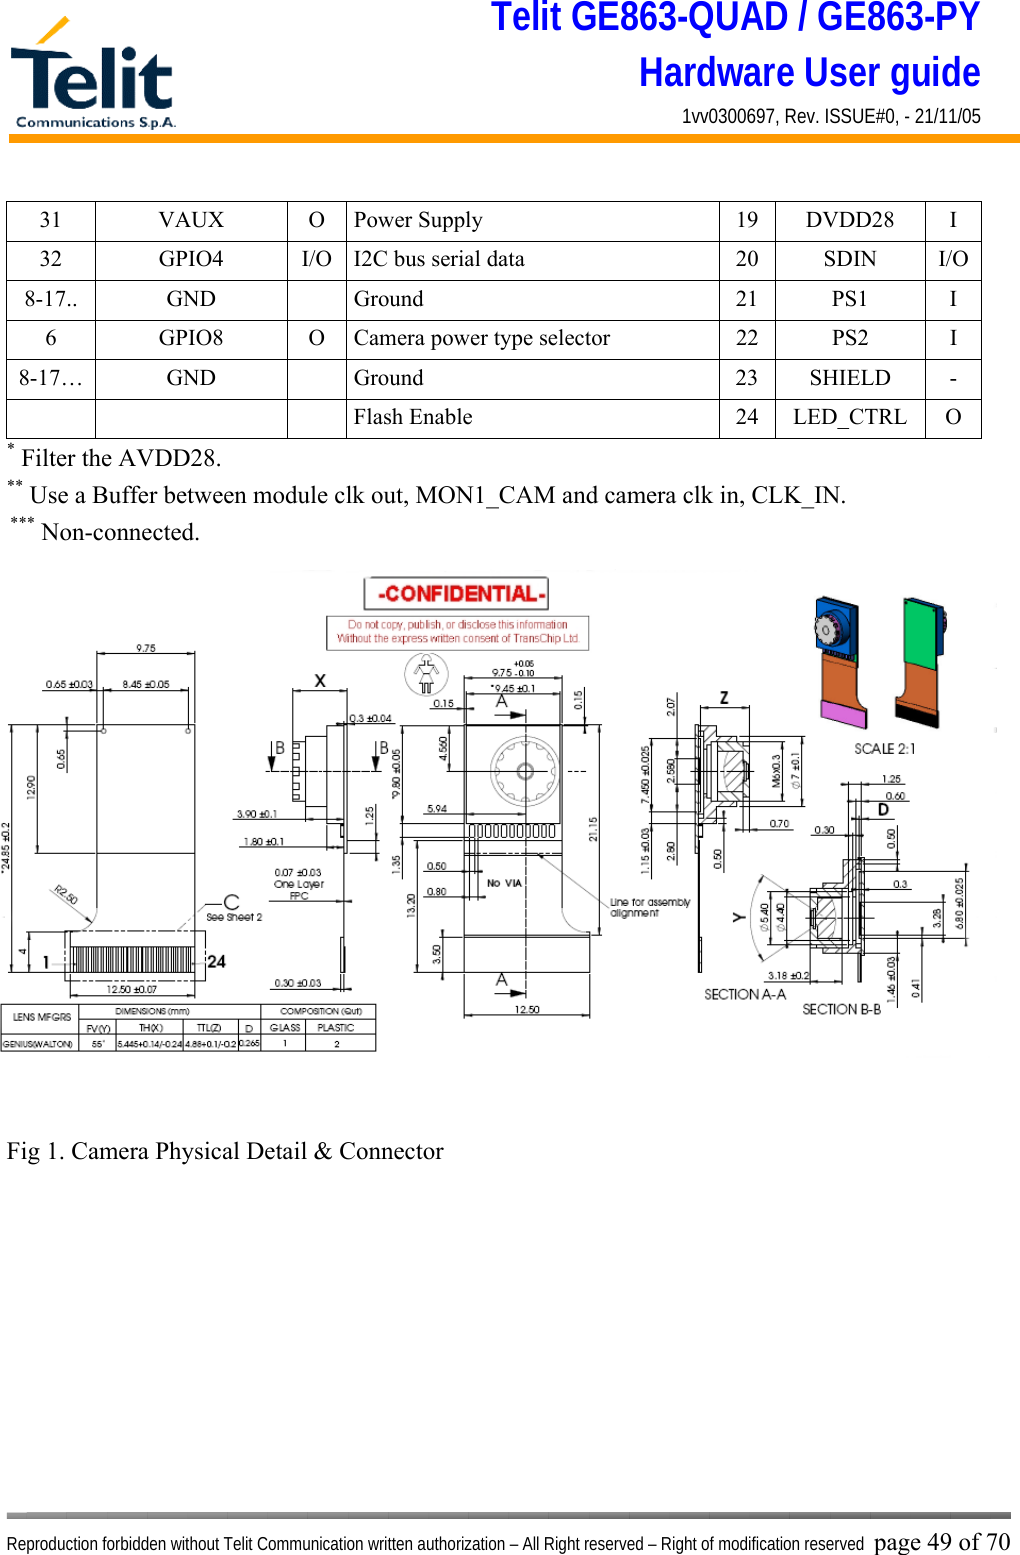 Telit GE863-QUAD / GE863-PY Hardware User guide 1vv0300697, Rev. ISSUE#0, - 21/11/05    Reproduction forbidden without Telit Communication written authorization – All Right reserved – Right of modification reserved page 49 of 70 31 VAUX O Power Supply  19 DVDD28 I 32  GPIO4  I/O  I2C bus serial data  20  SDIN  I/O 8-17.. GND   Ground  21 PS1 I 6  GPIO8  O  Camera power type selector  22  PS2  I 8-17… GND   Ground  23 SHIELD -    Flash Enable  24 LED_CTRL O * Filter the AVDD28. ** Use a Buffer between module clk out, MON1_CAM and camera clk in, CLK_IN.  *** Non-connected.   Fig 1. Camera Physical Detail &amp; Connector        